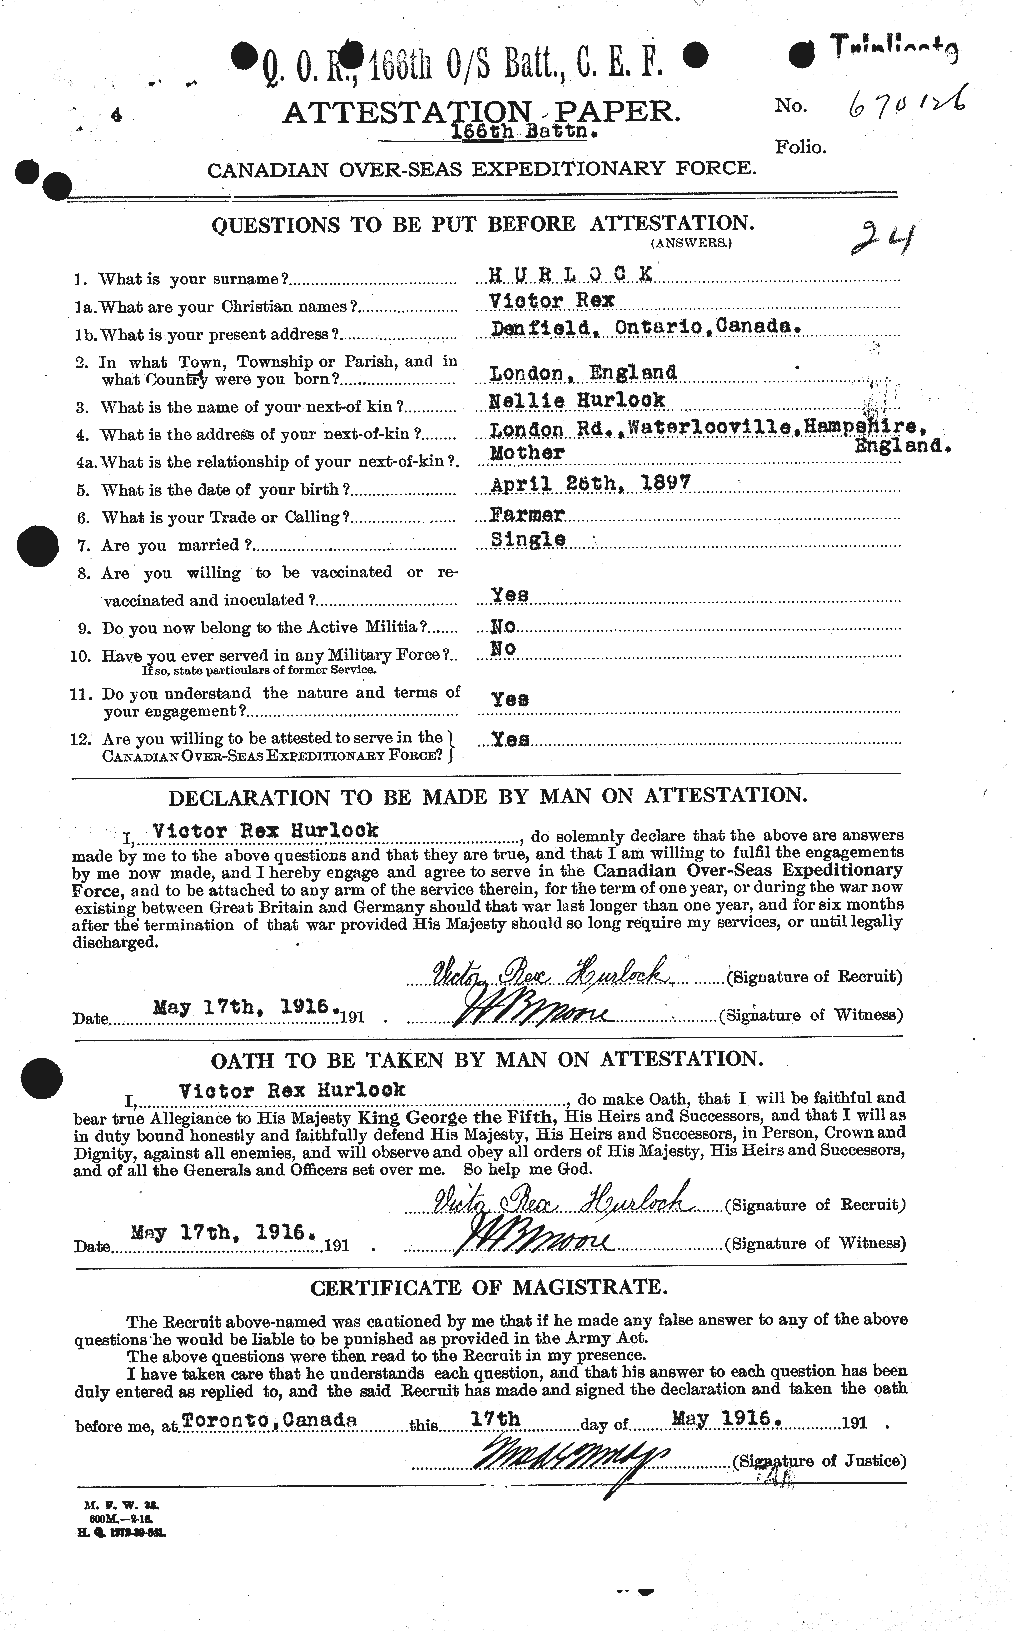 Personnel Records of the First World War - CEF 409831a